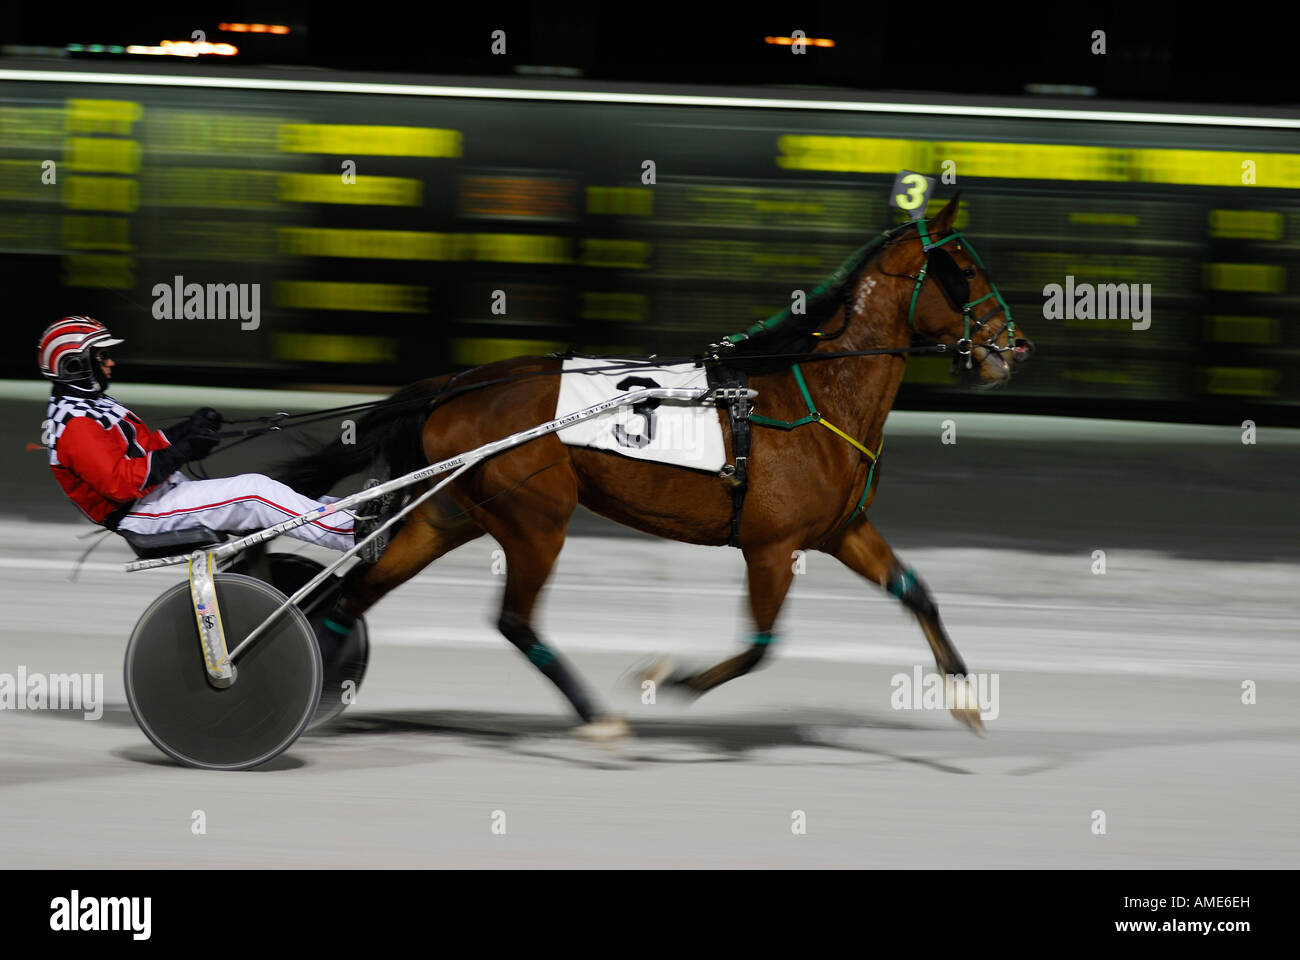 Harness racing pacer speeding past finish line ahead of the pack at night in winter Ontario Stock Photo